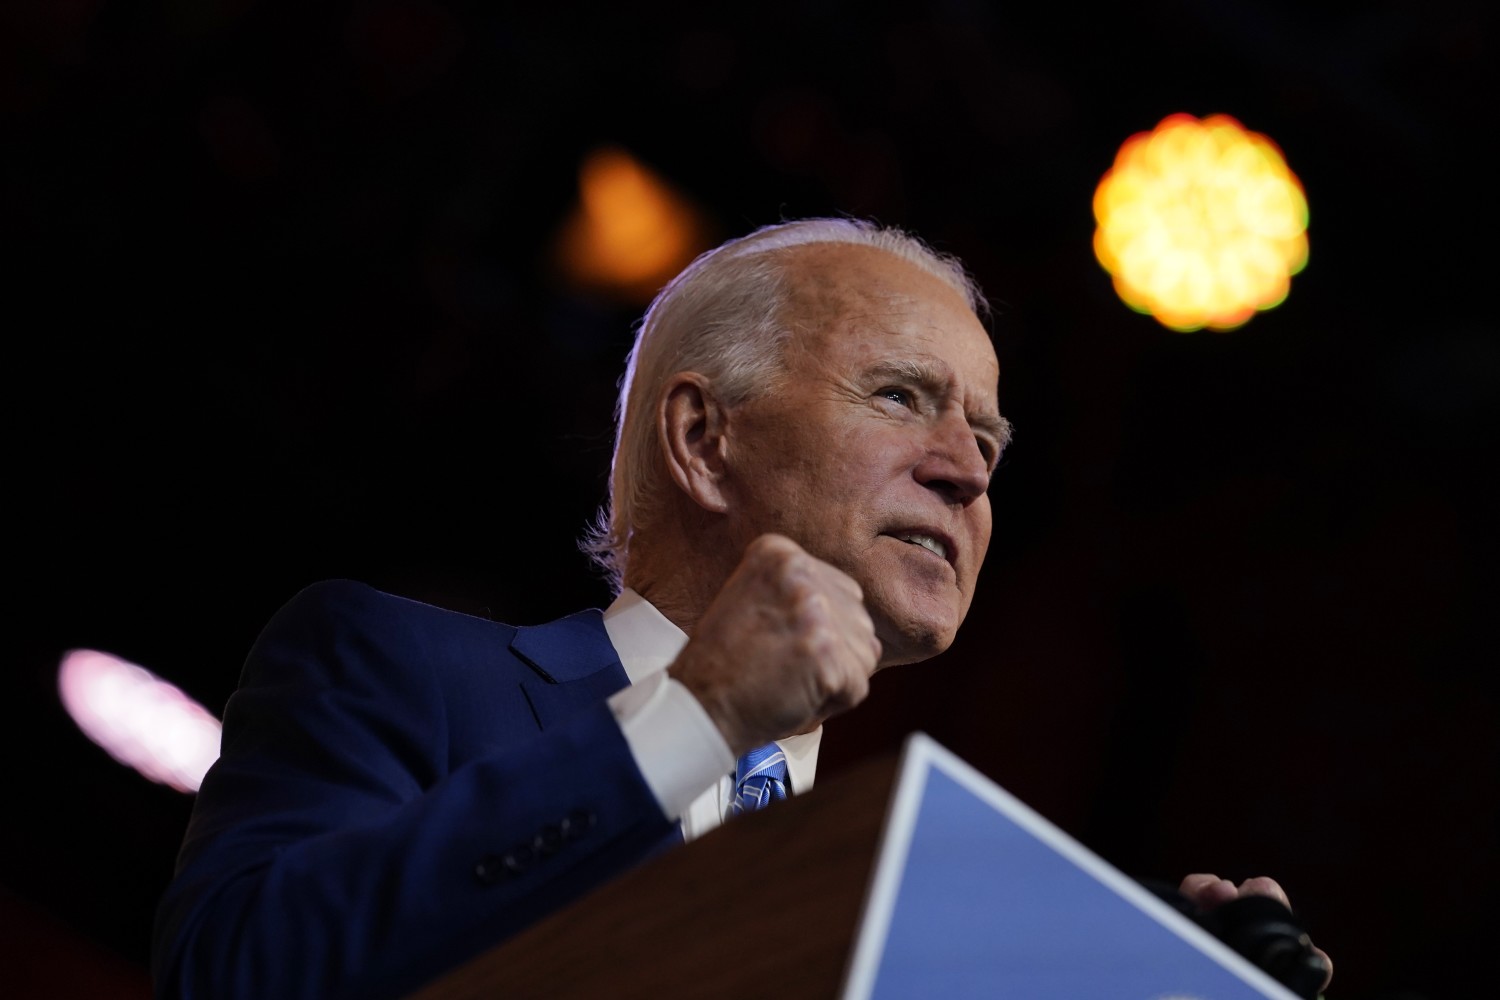 Biden steps into management vacuum to reassure American citizens with Thanksgiving address